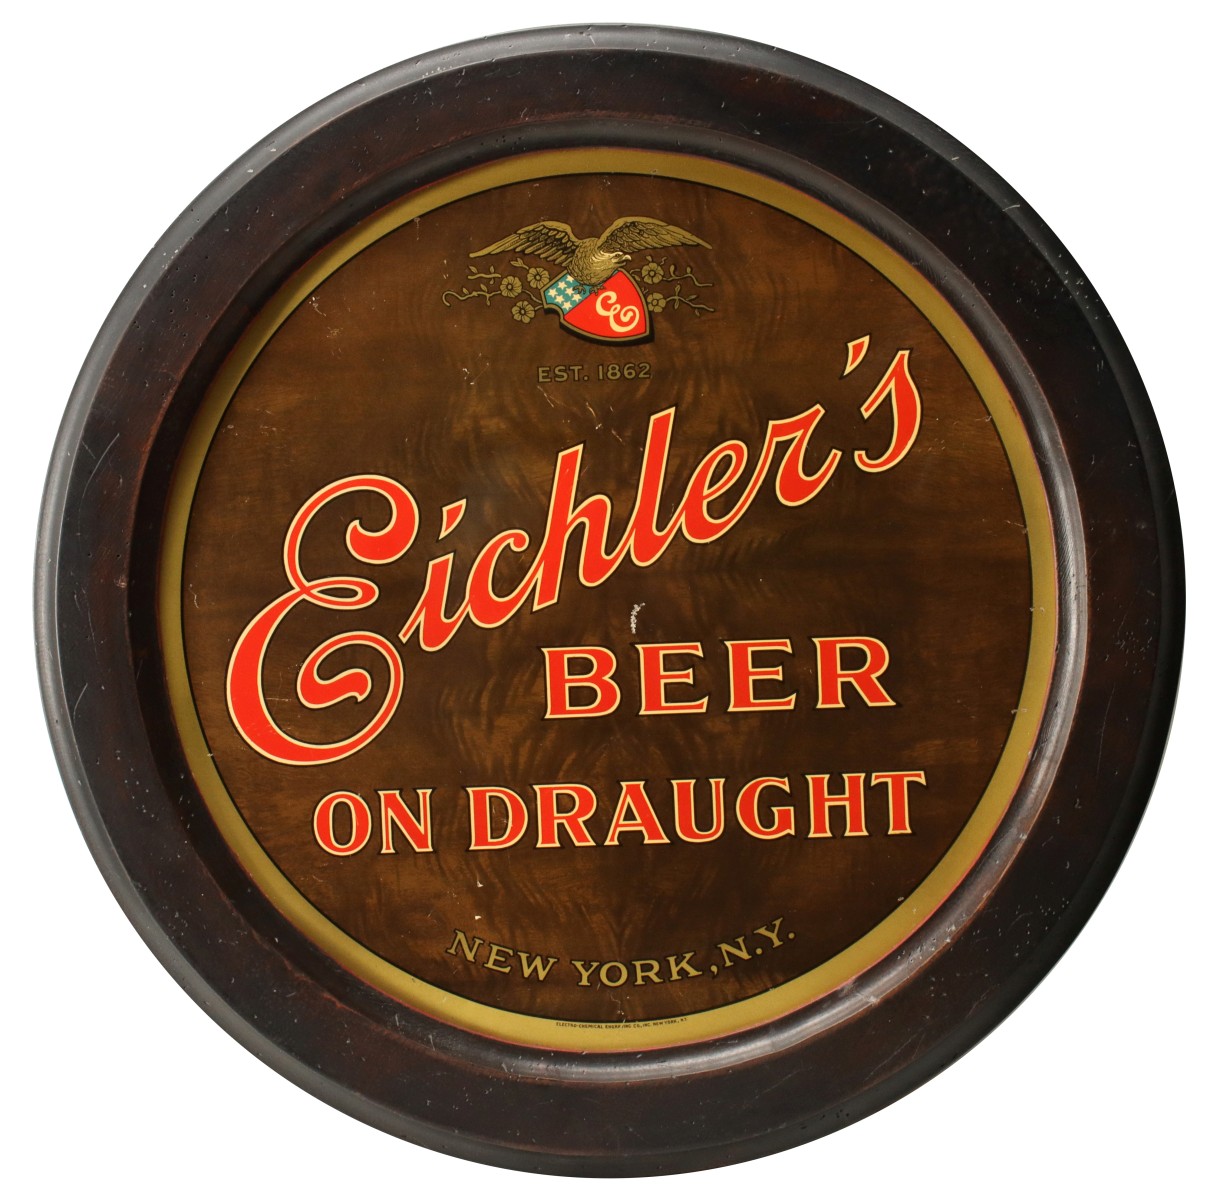 AN EICHLER'S BEER PRE-PROHIBITION TIN ADVERTISING SIGN